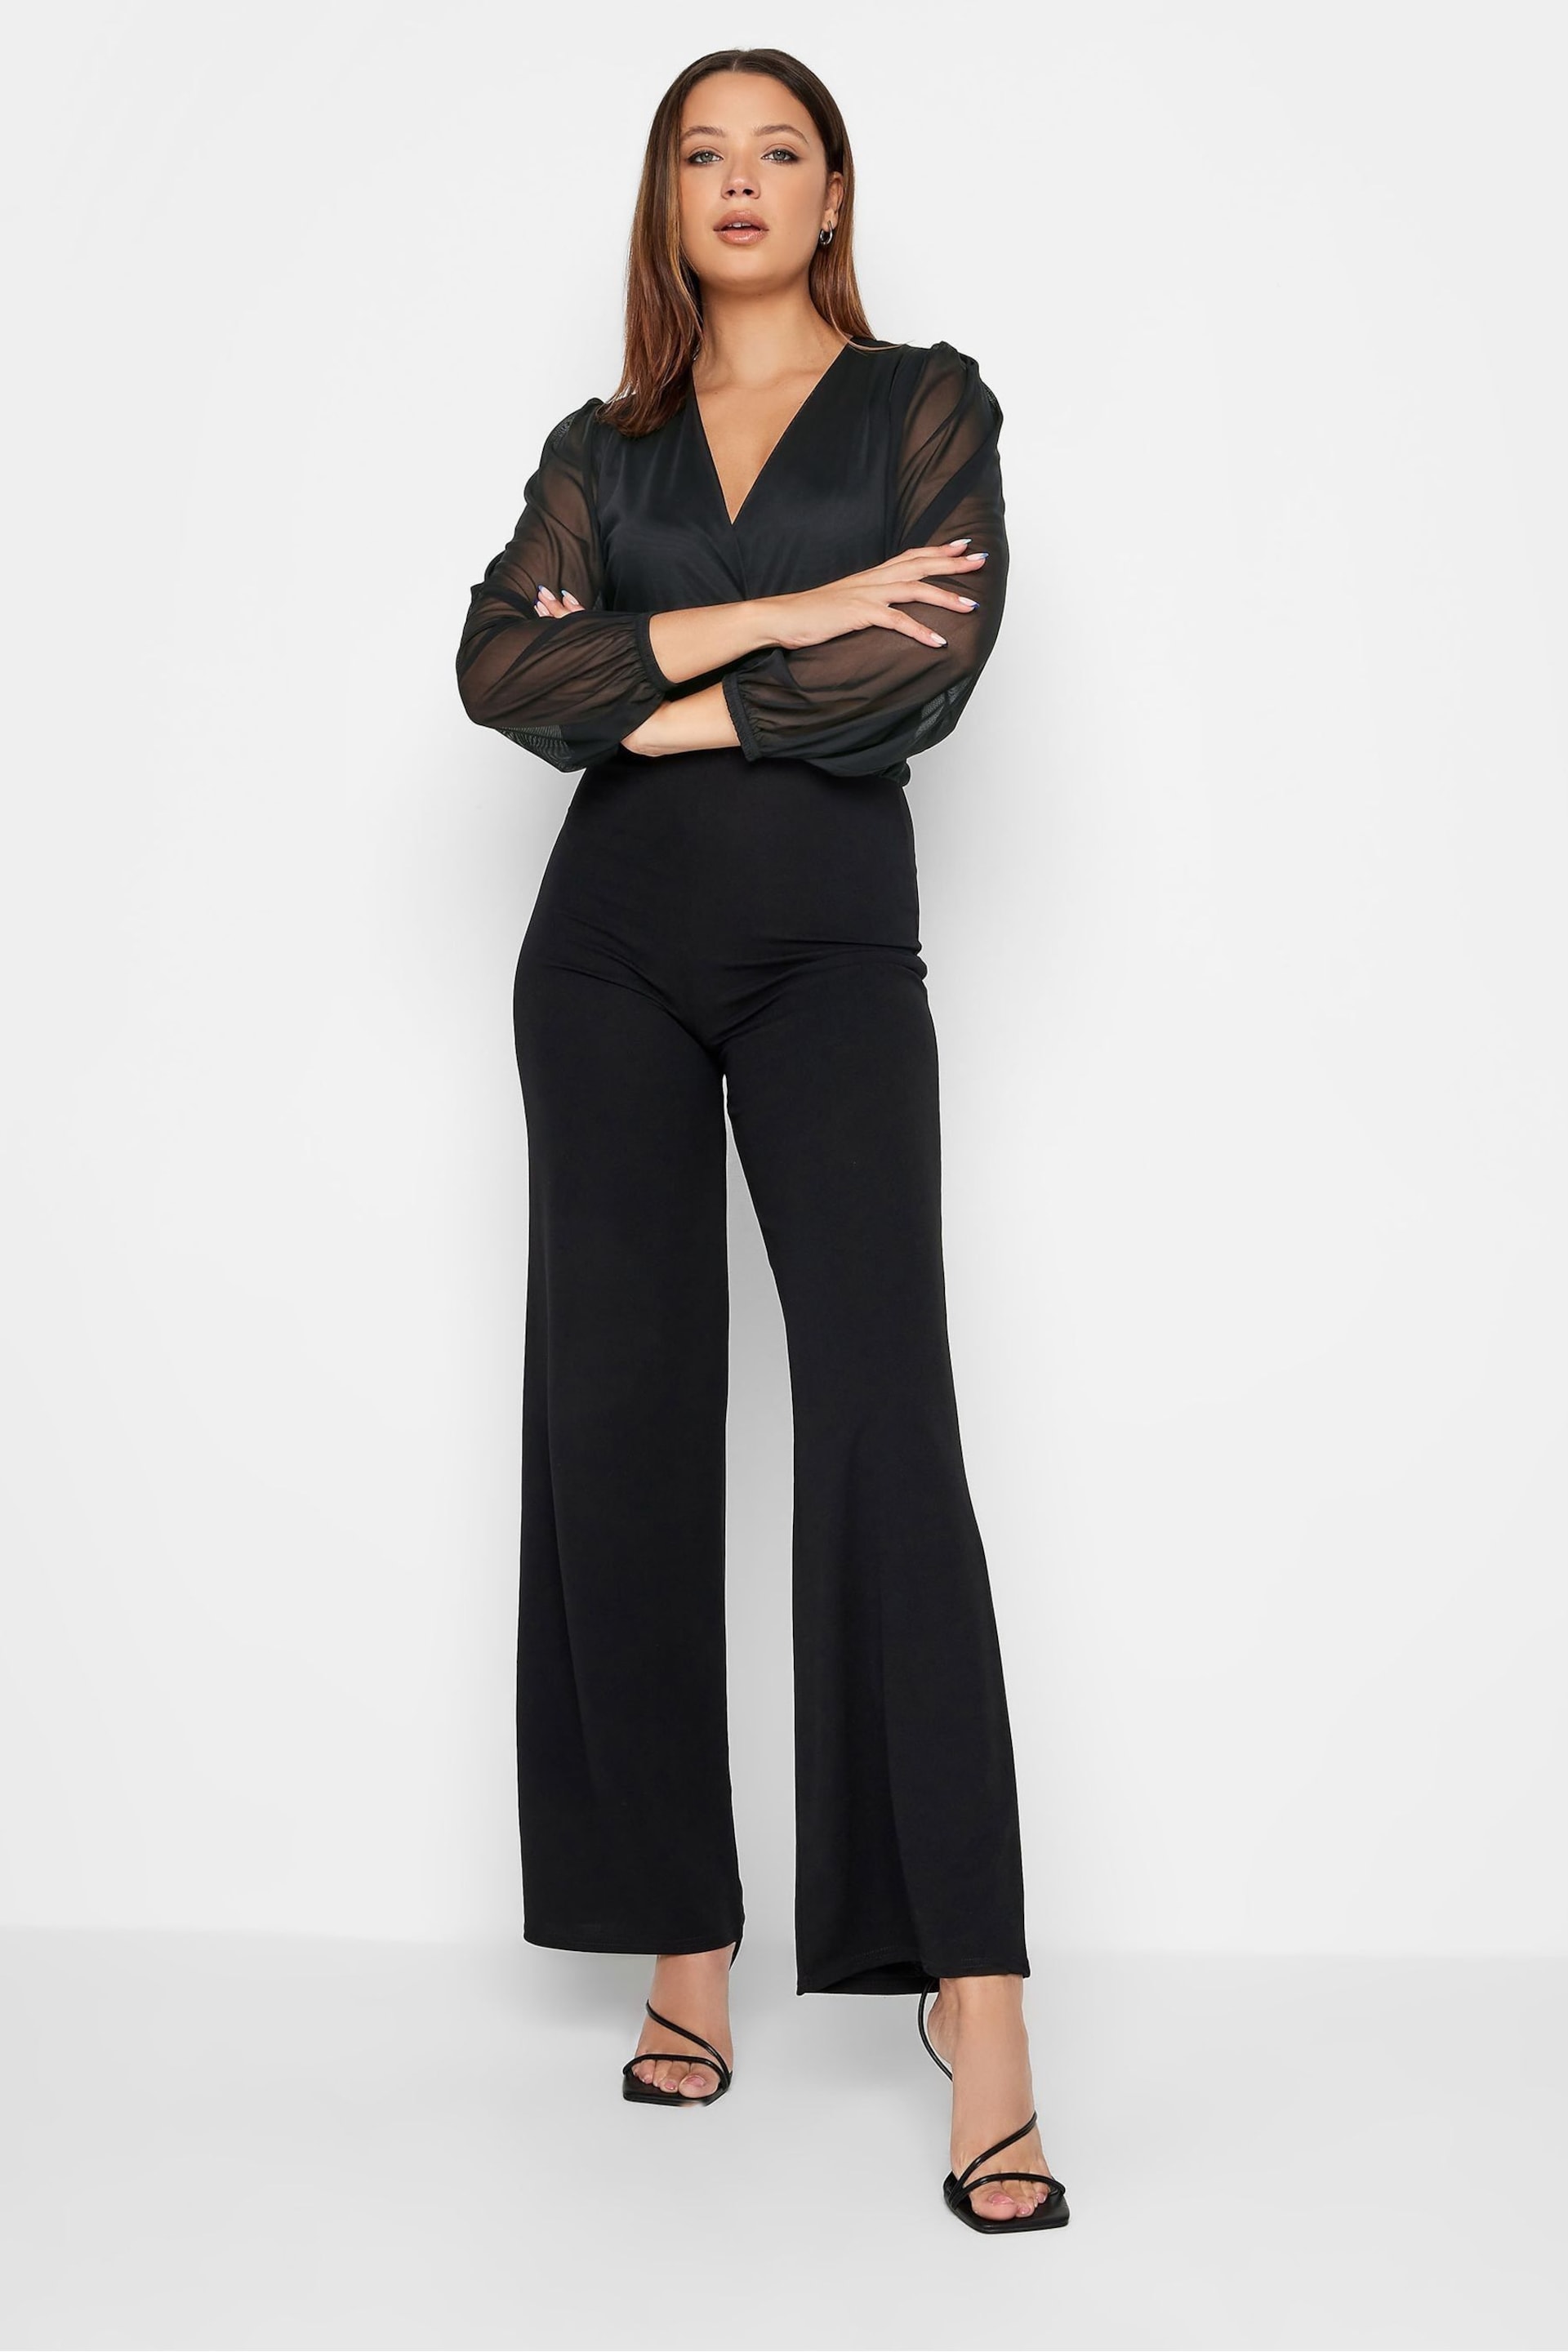 Long Tall Sally Black Mesh Sleeve Wrap Jumpsuit - Image 3 of 4